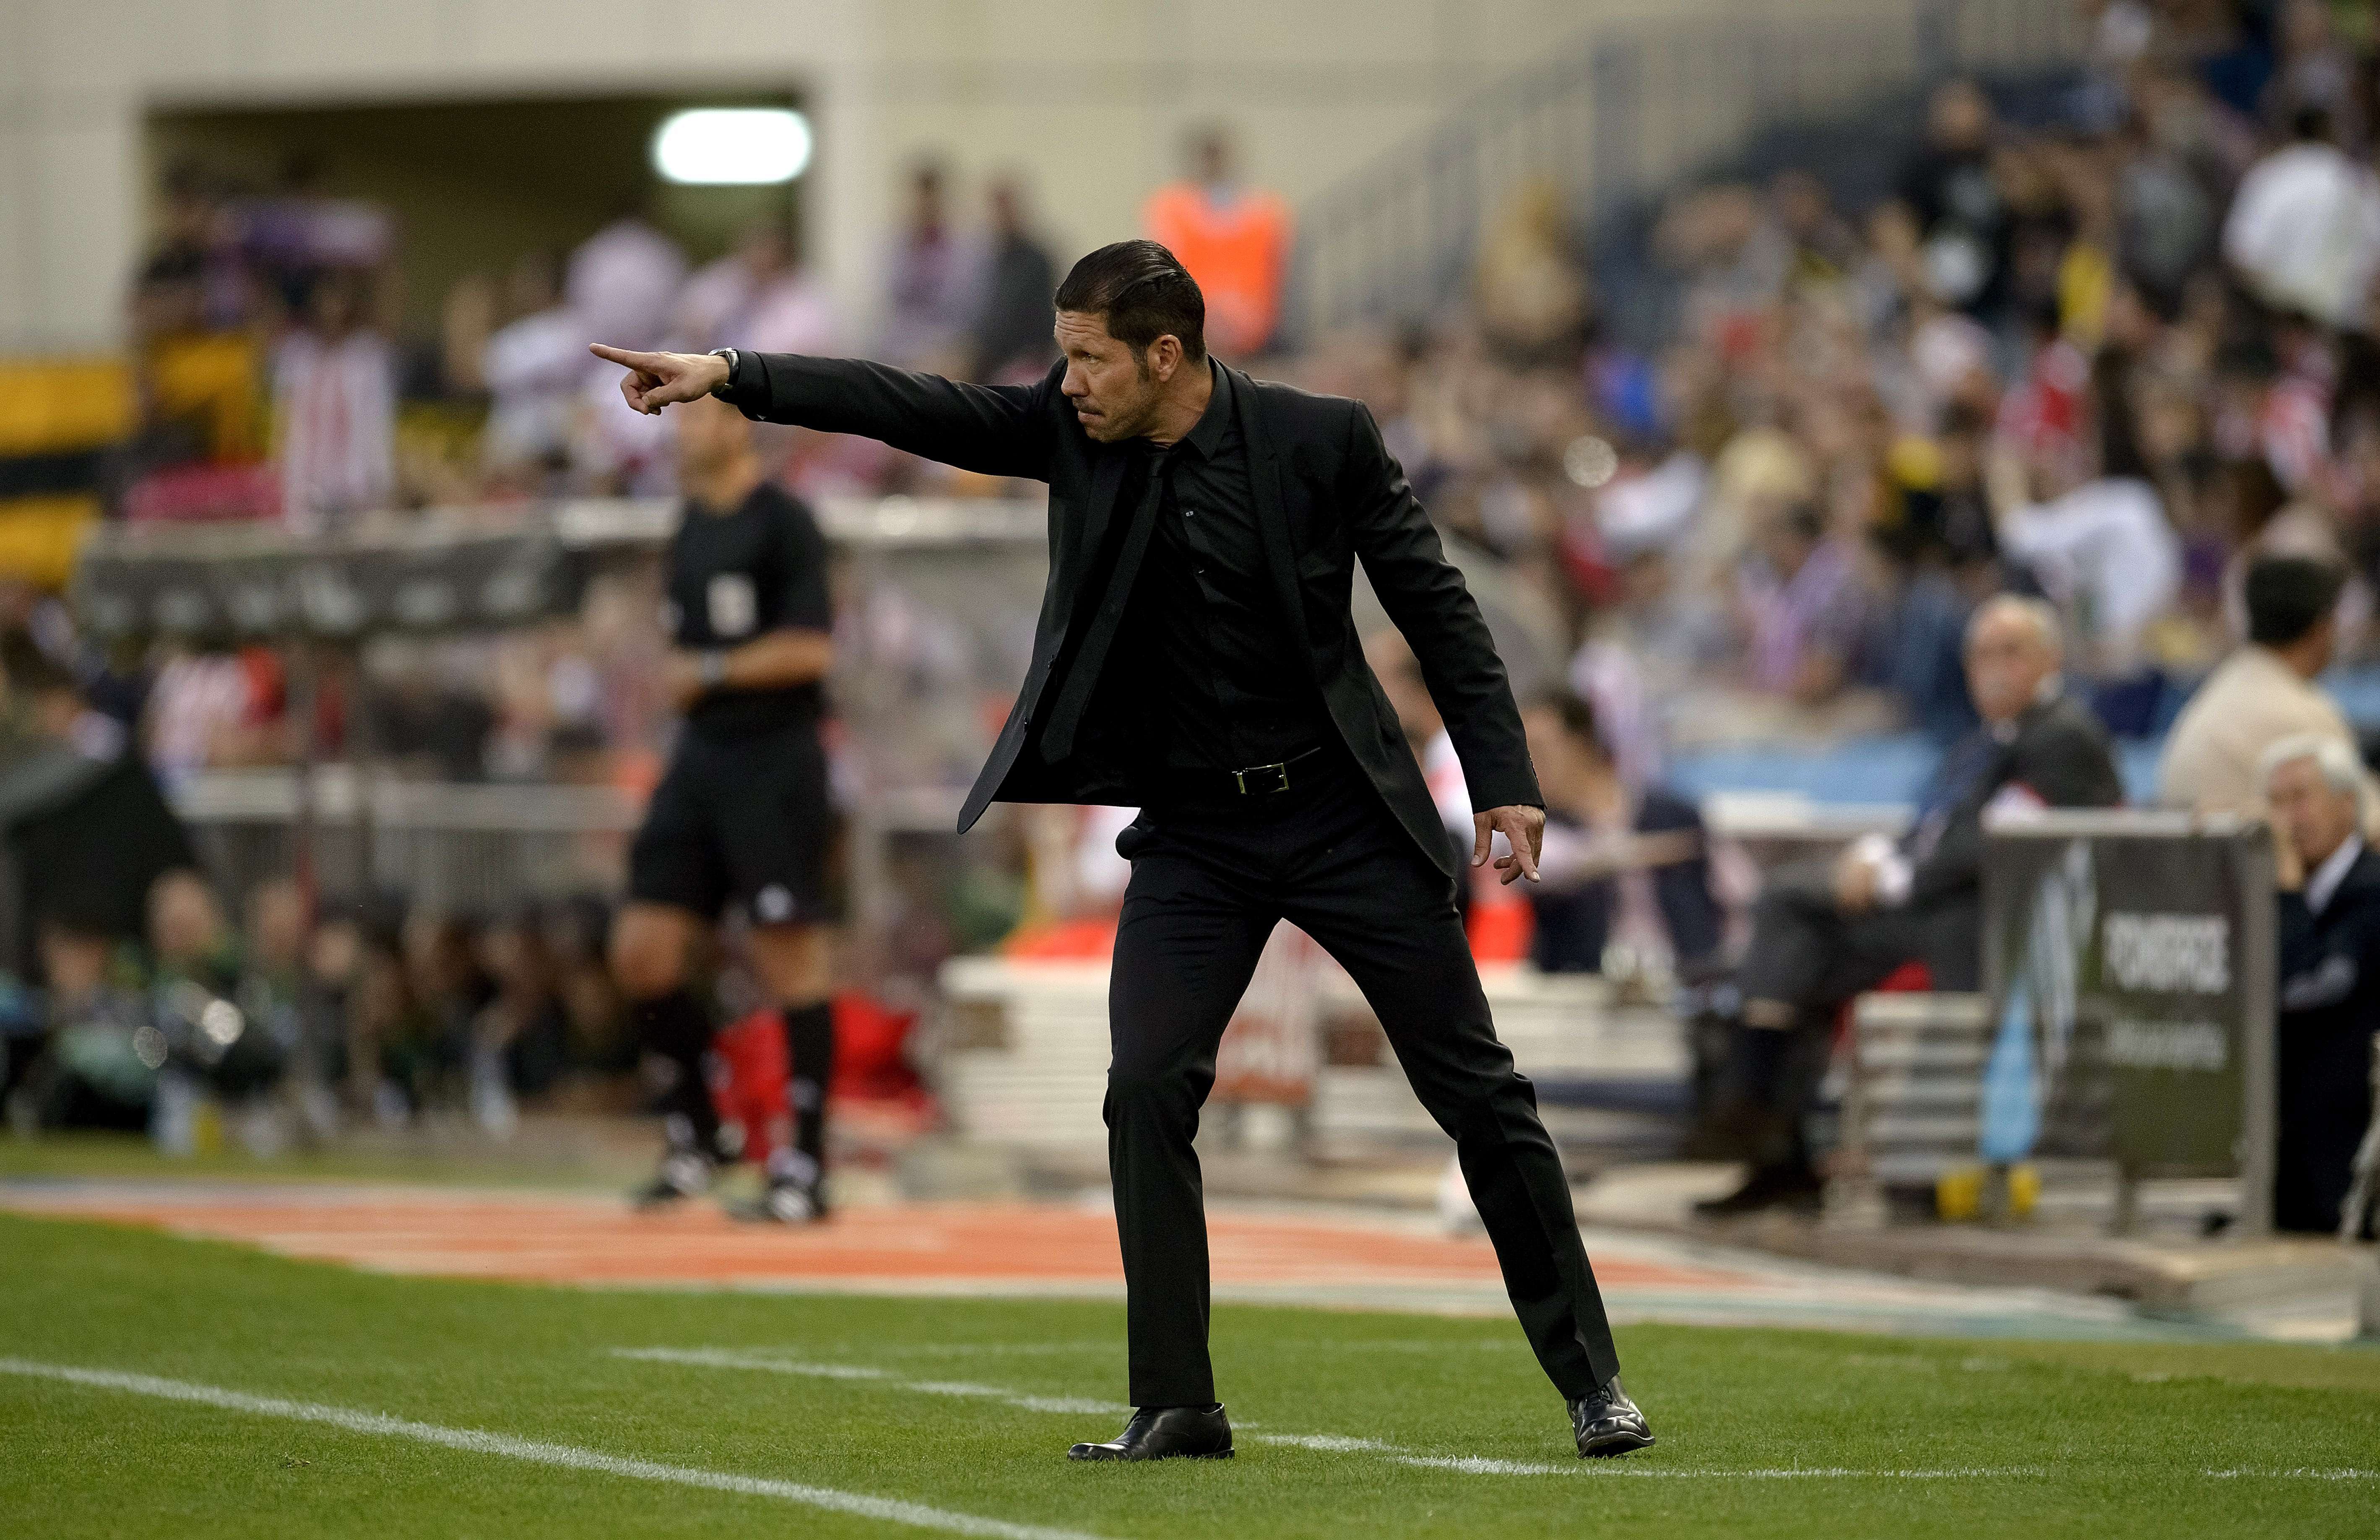 Atletico Madrid's Argentinian coach Diego Simeone gestures during the Spanish league football match Club Atletico de Madrid vs Elche CF at the Vicente Calderon stadium in Madrid on April 18, 2014. AFP PHOTO/ DANI POZODANI POZO/AFP/Getty Images@@DV1707650.jpg